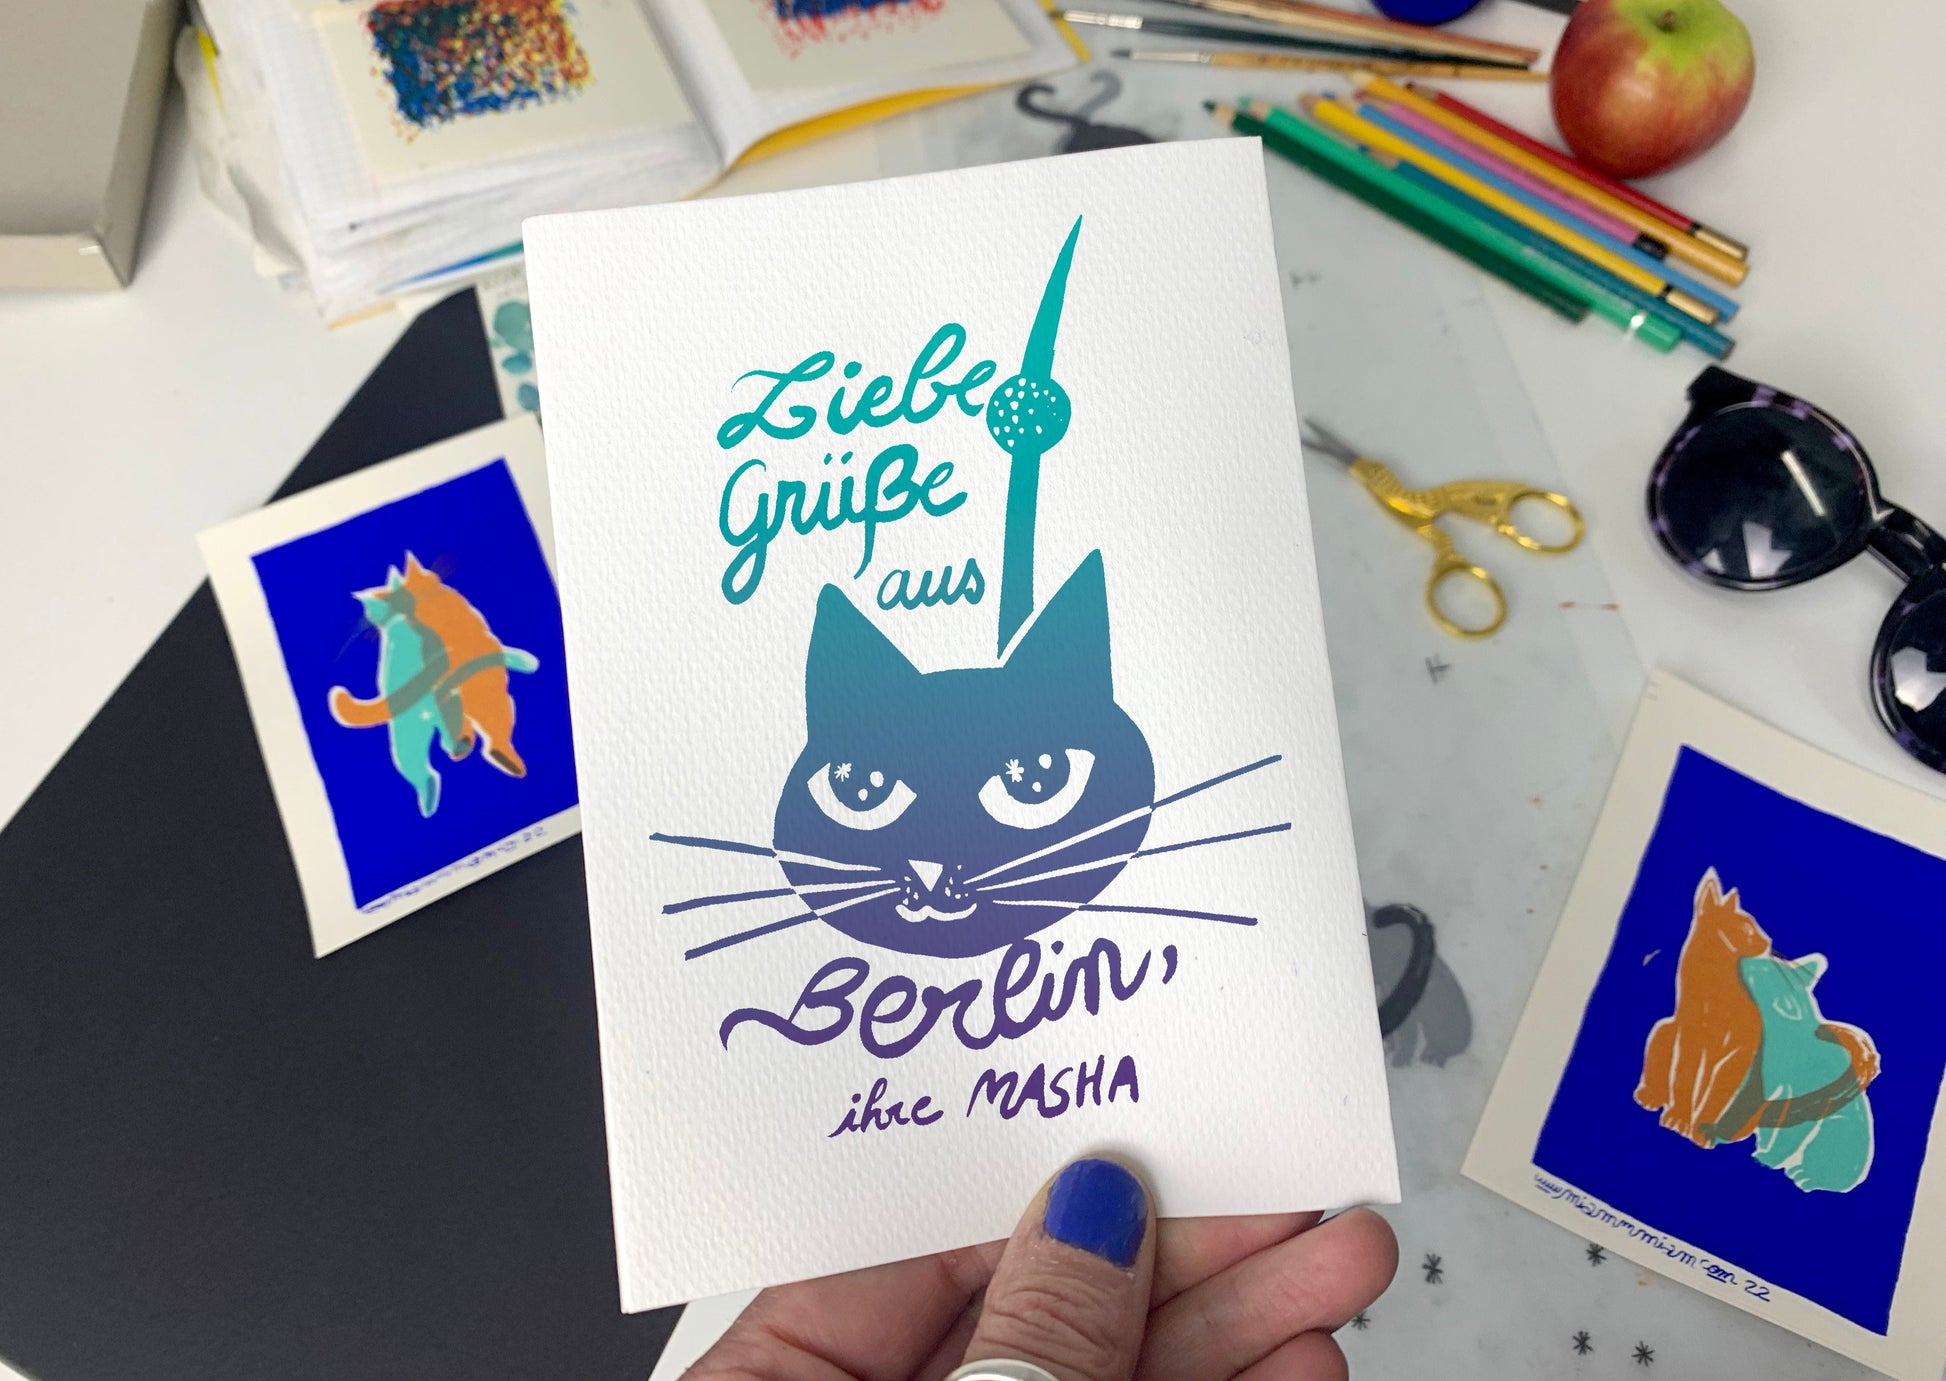 "Screen Print Your Own Postcards" Workshop with Julie in Berlin, Germany